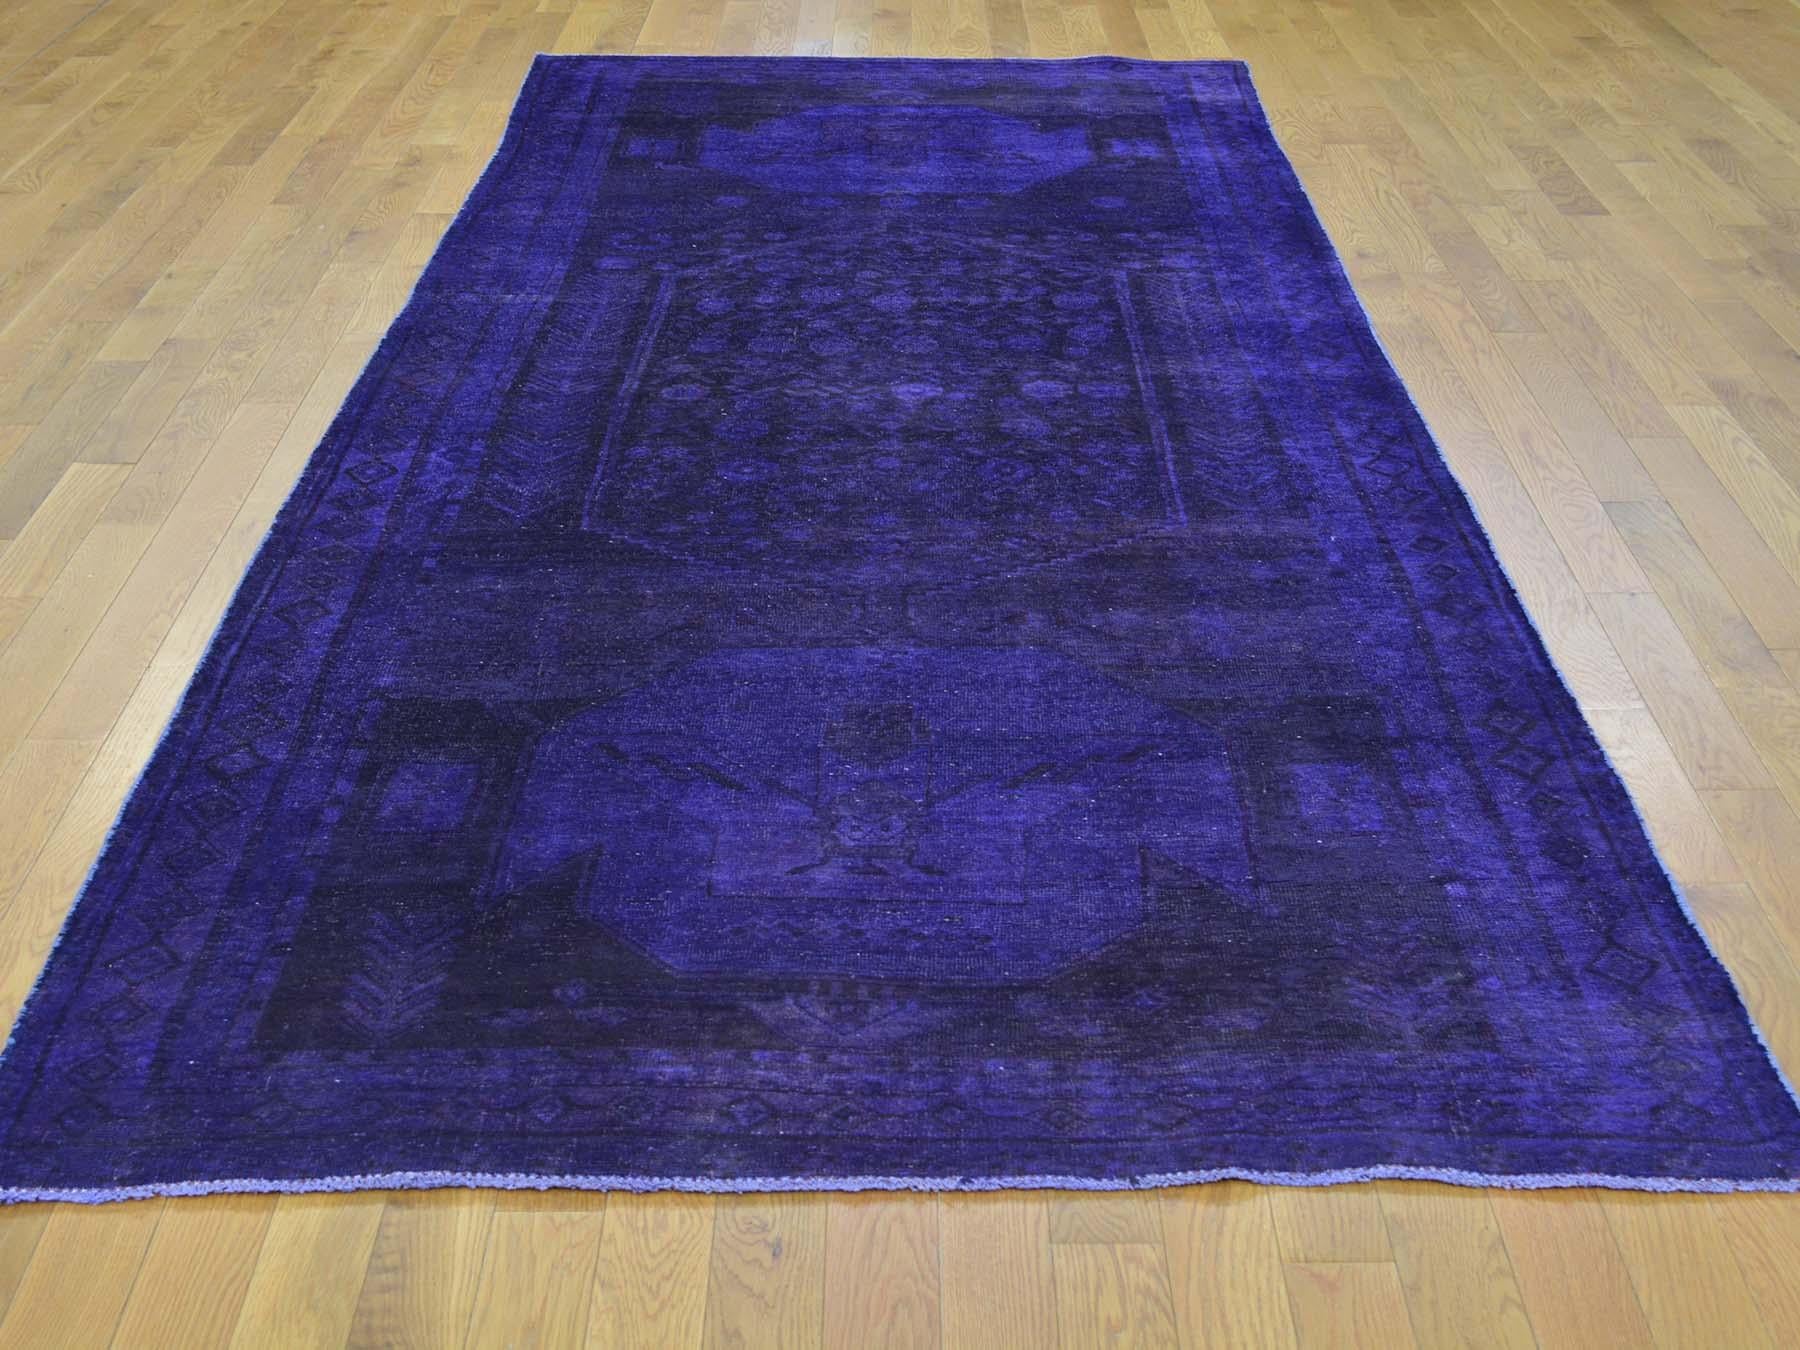 This is a truly genuine one-of-a-kind semi antique Persian Malayer overdyed vintage wide runner rug. It has been knotted for months and months in the centuries-old Persian weaving craftsmanship techniques by expert artisans.

Primary materials: